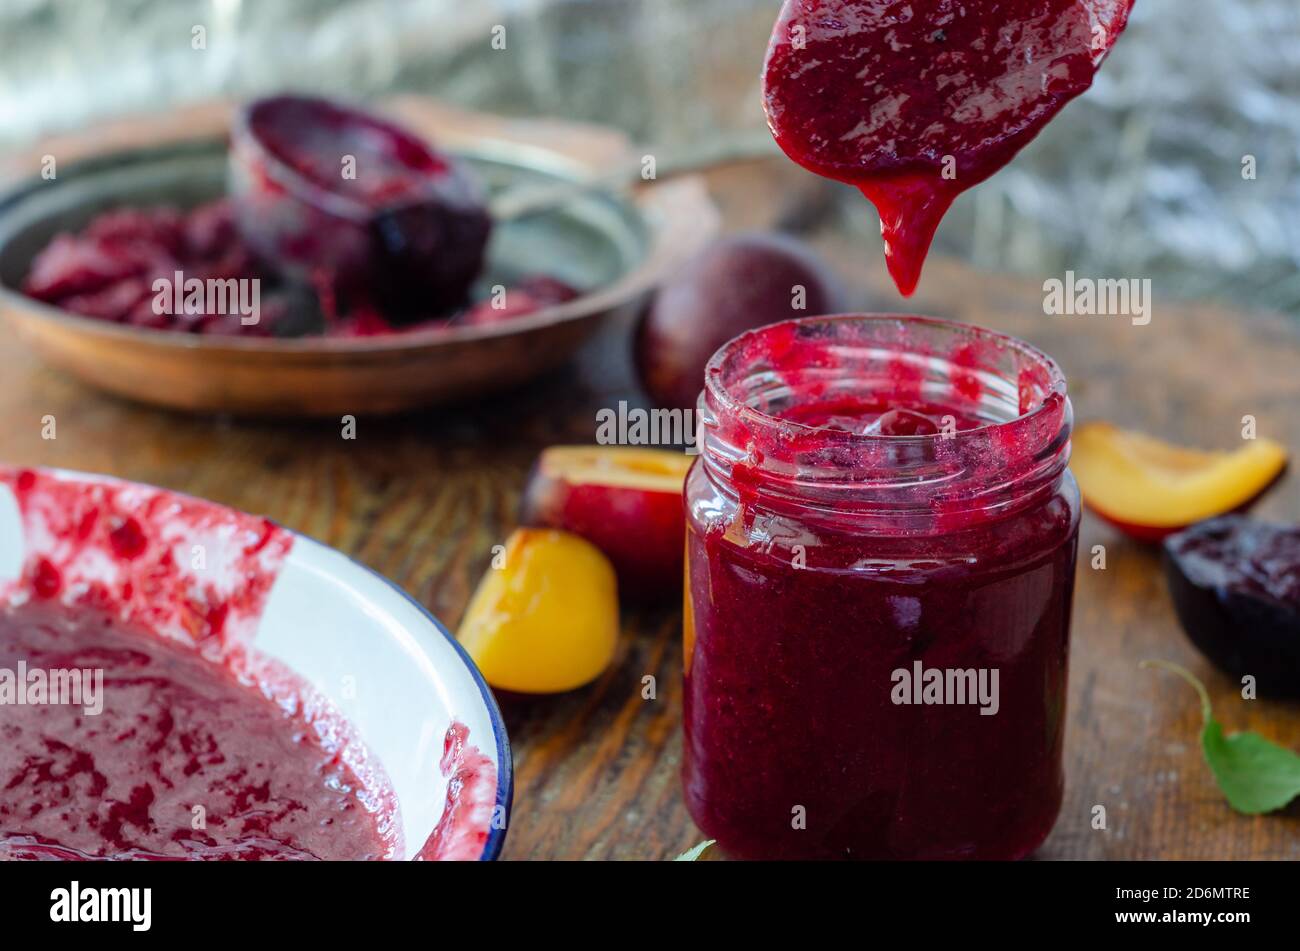 Red plum marmalade on the table. Stock Photo